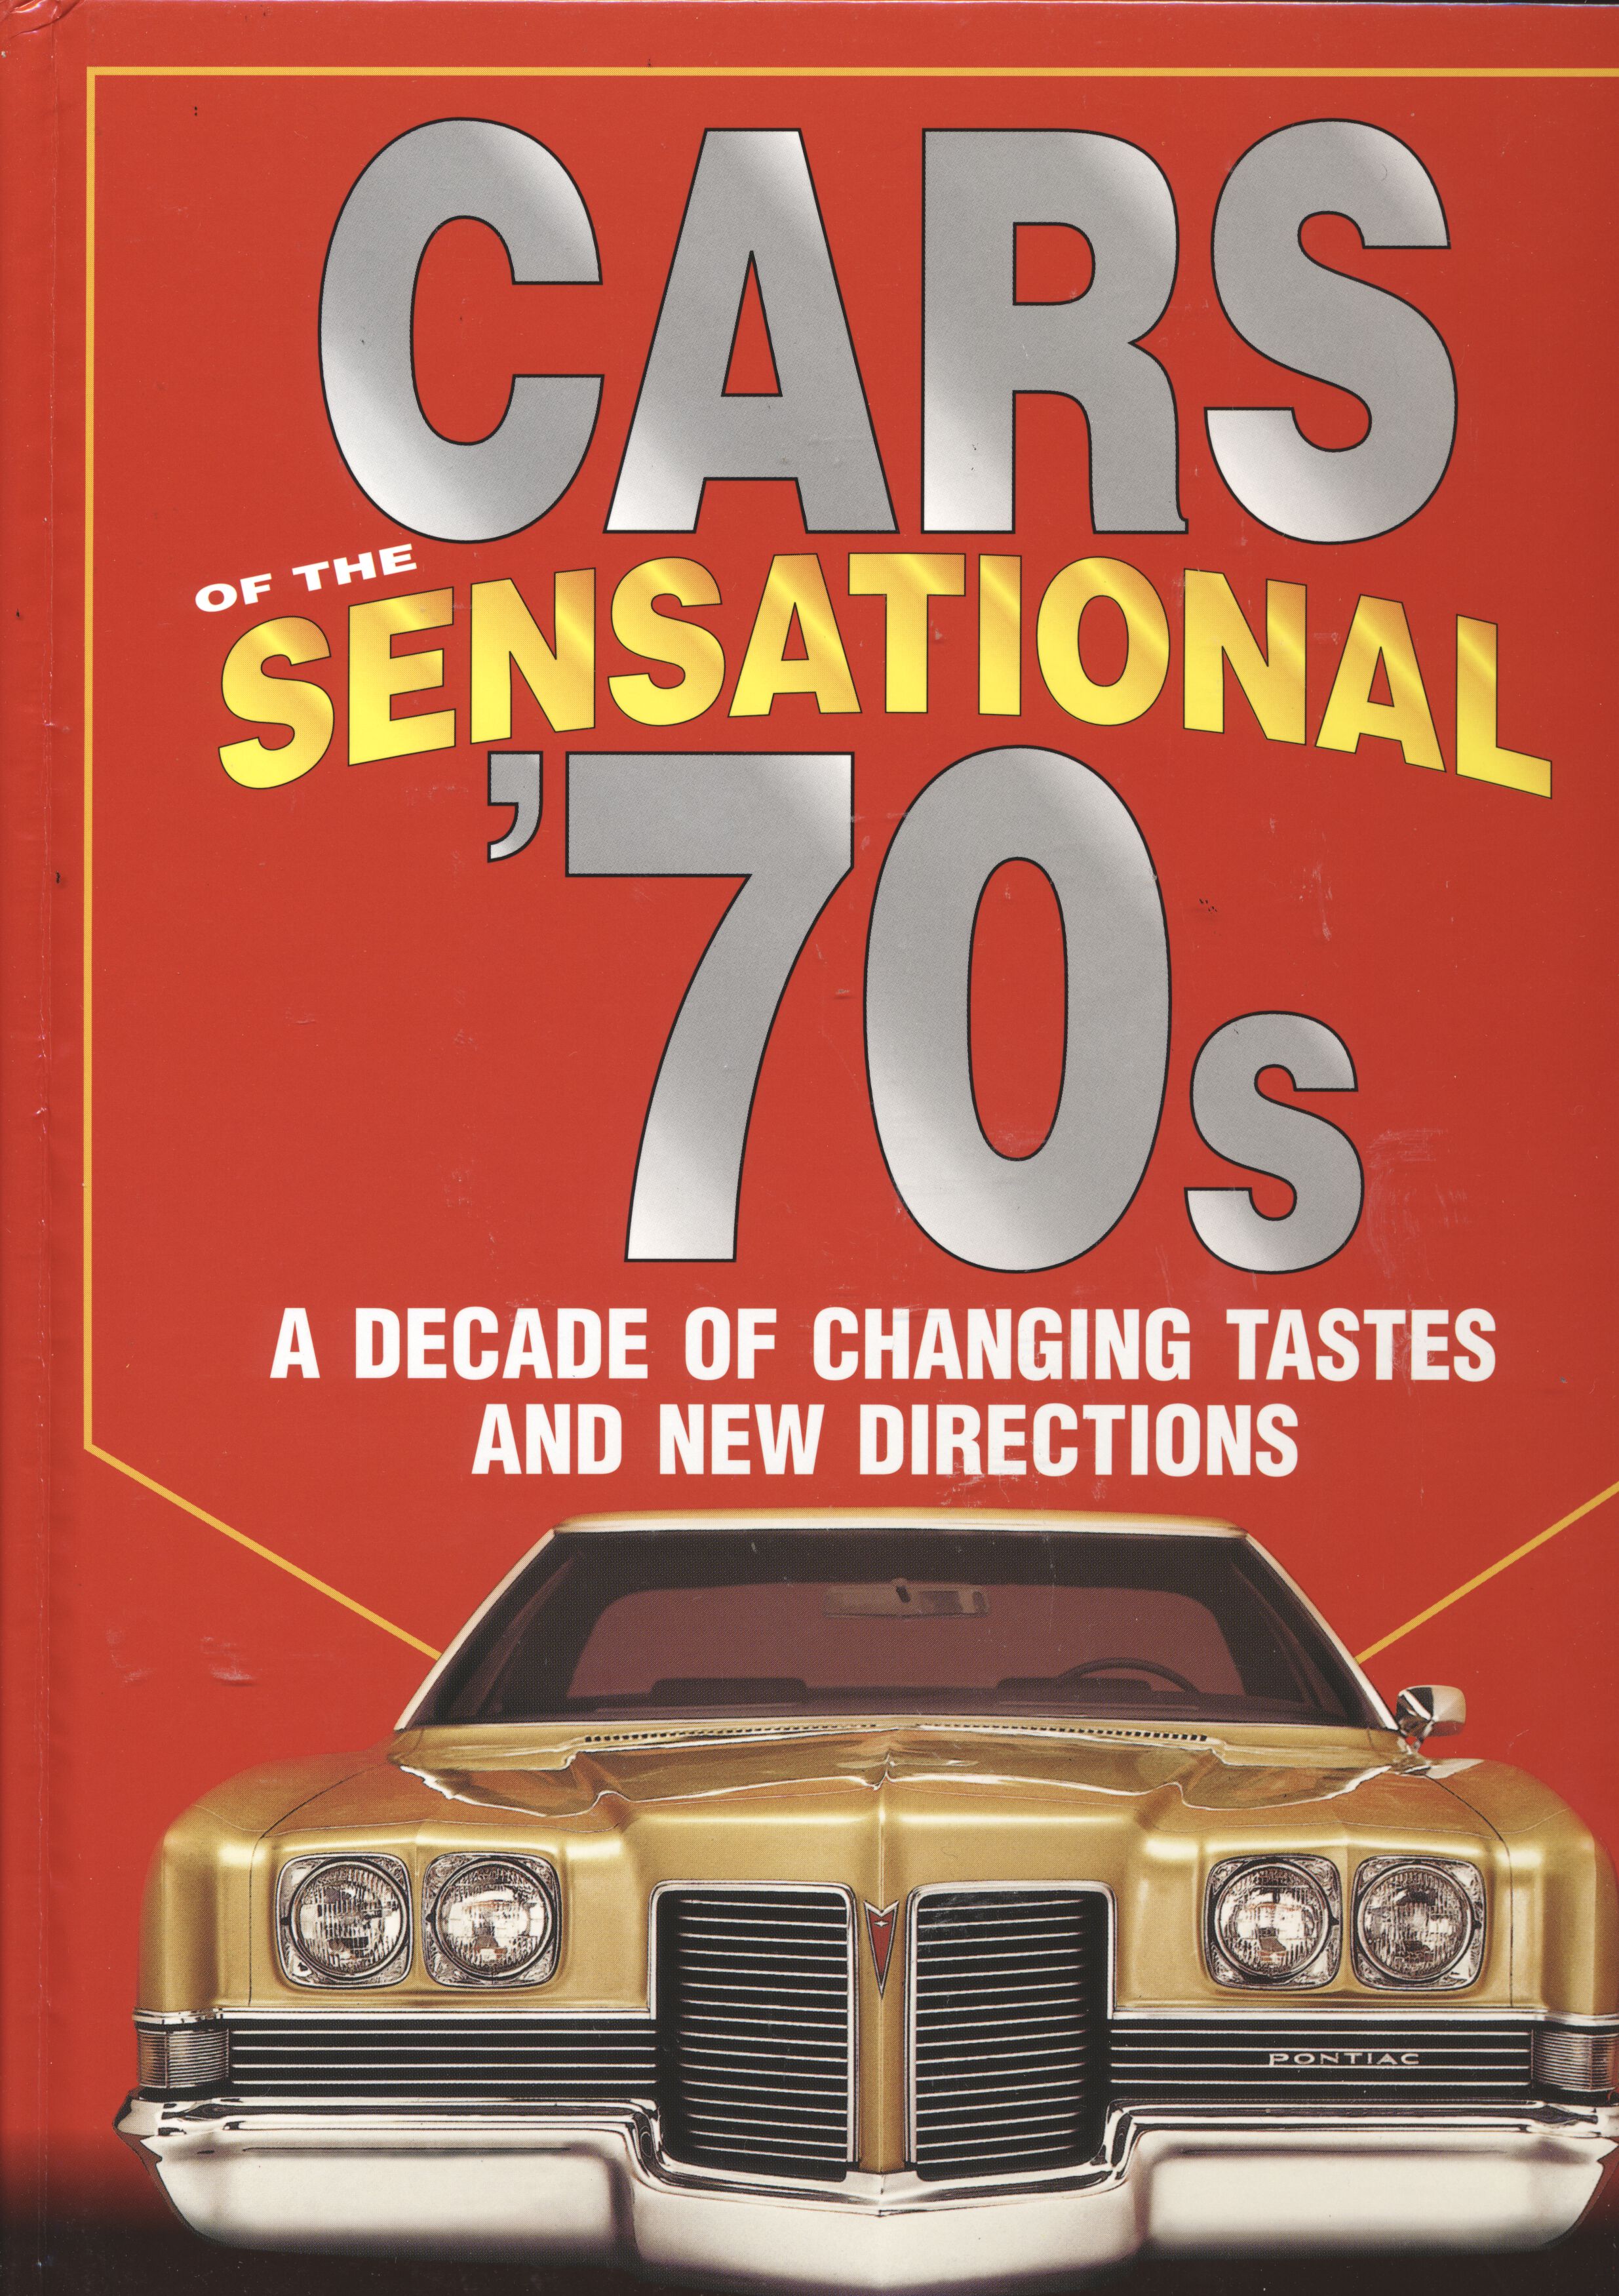 Cars of the Sensational 70's